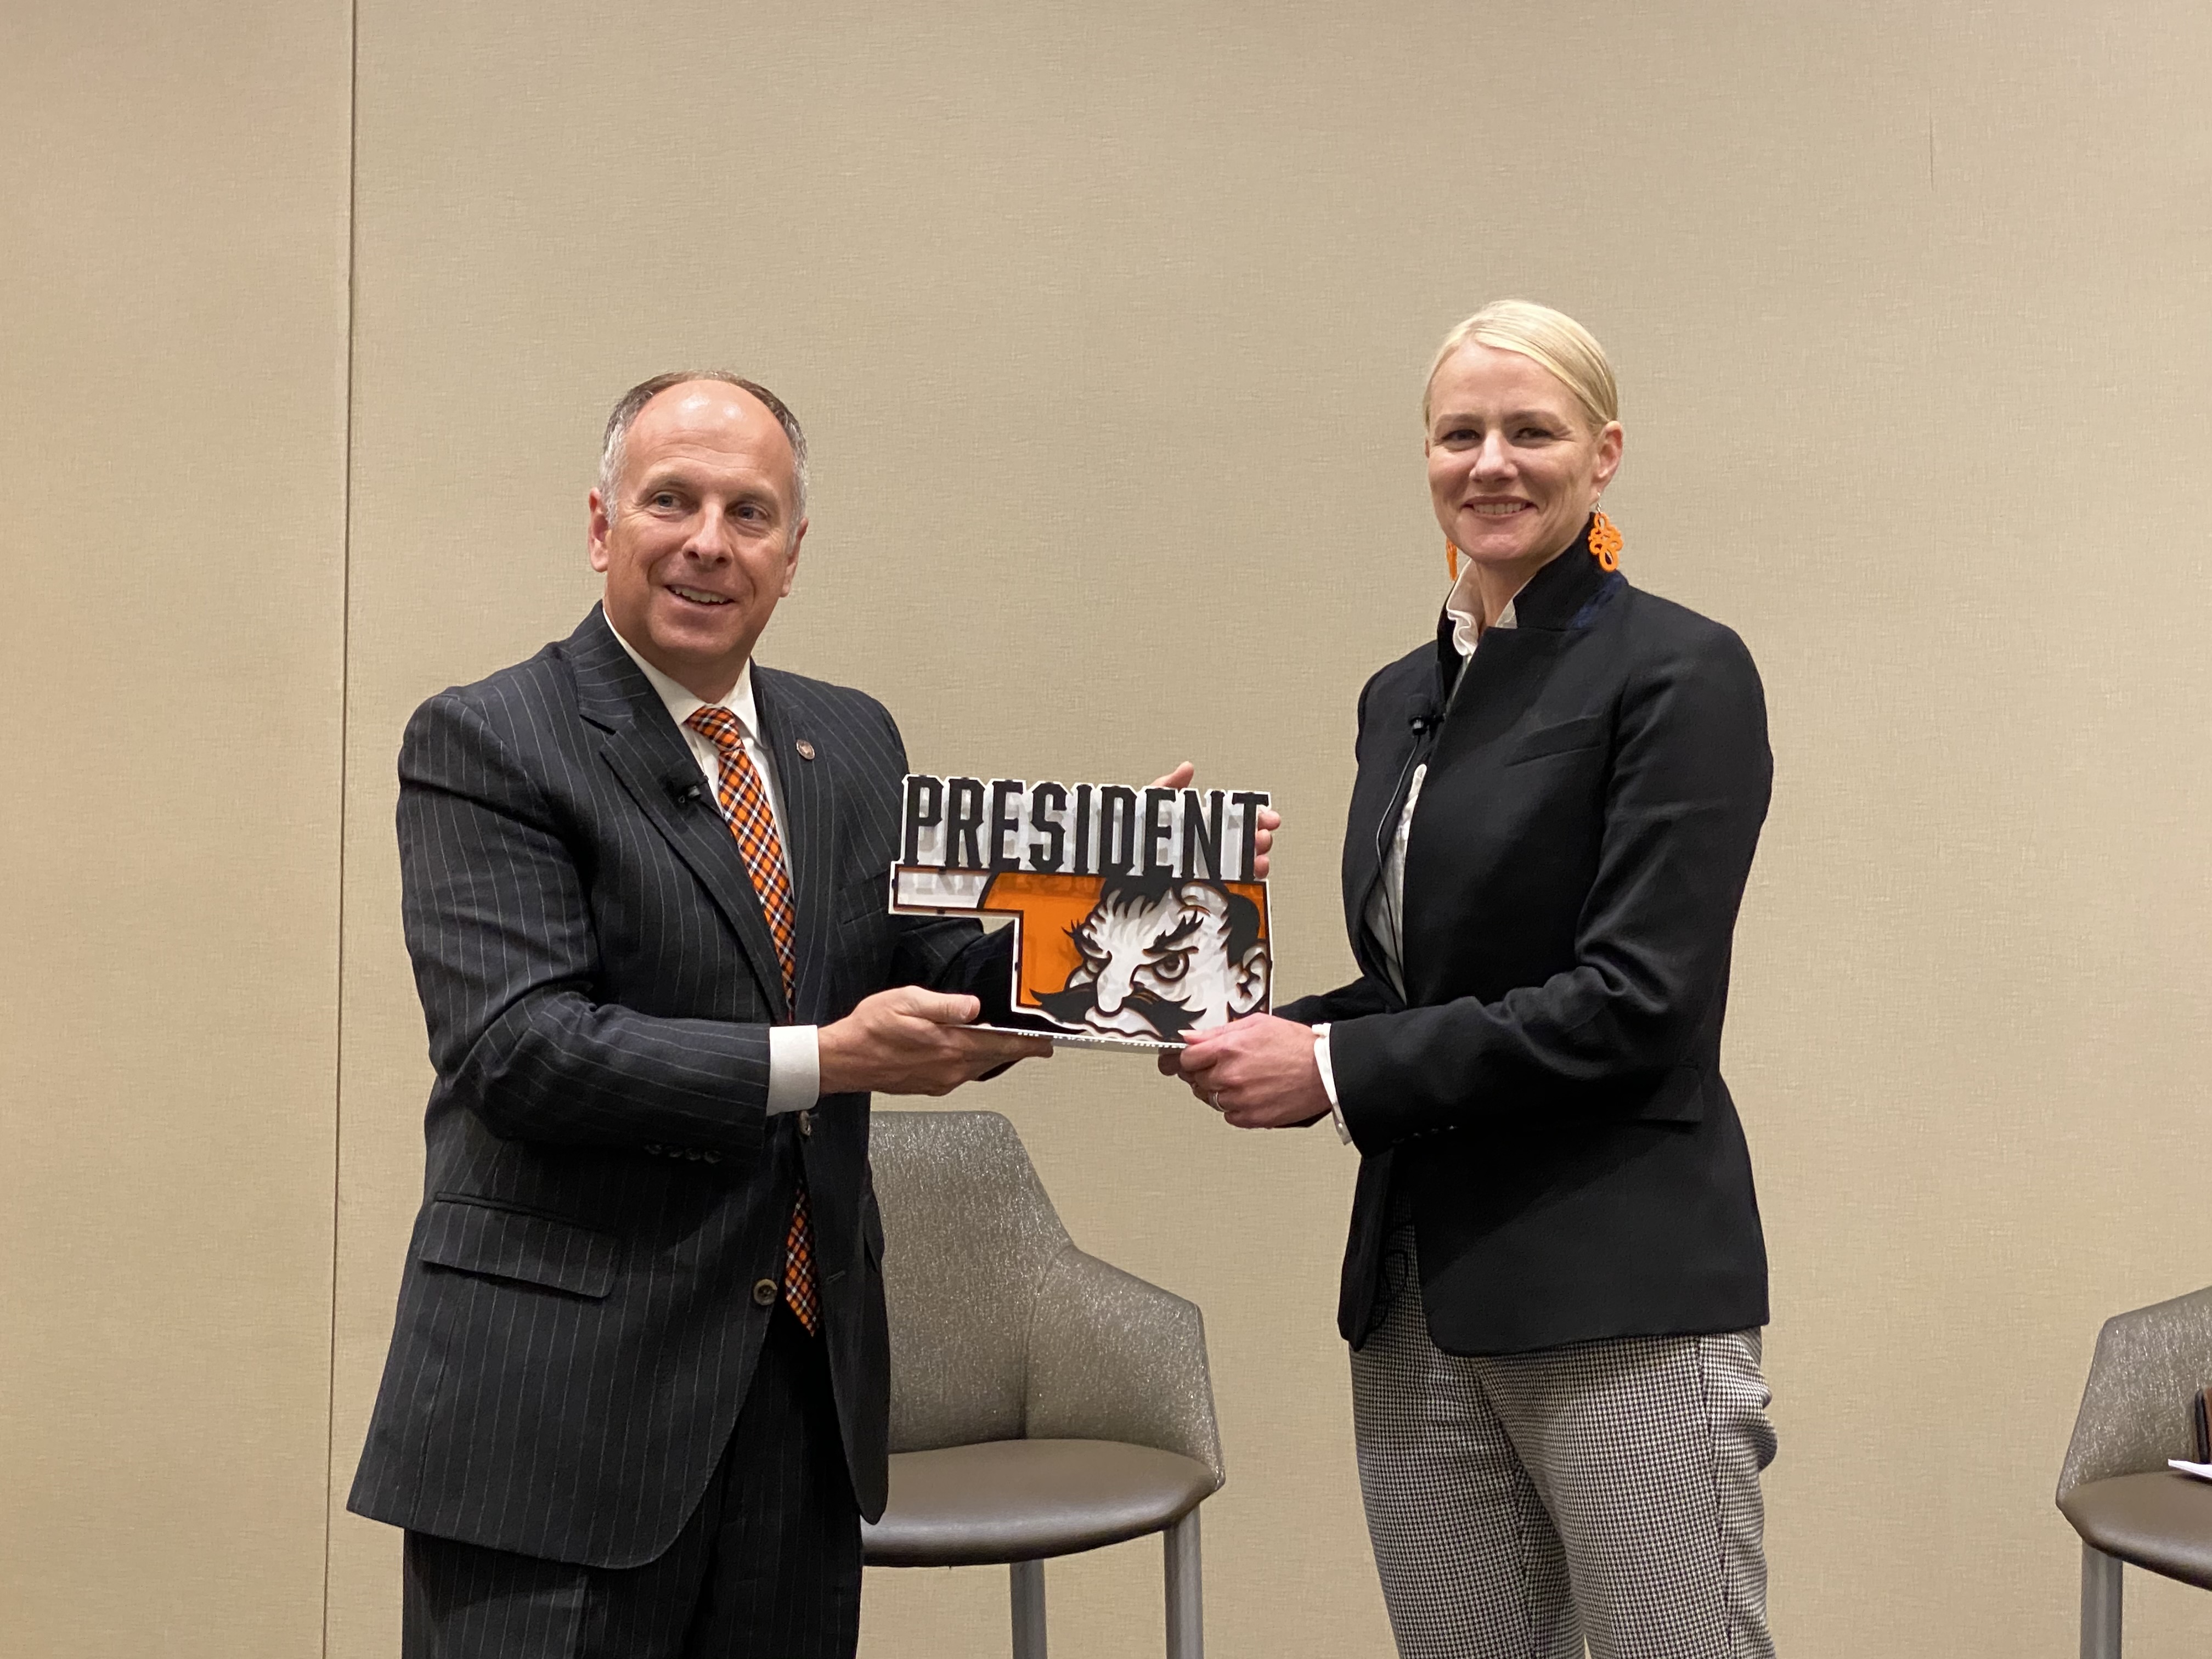 OSU President Designate Dr. Kayse Shrum Says Her Goal is to Advance the Land Grant Mission in Oklahoma